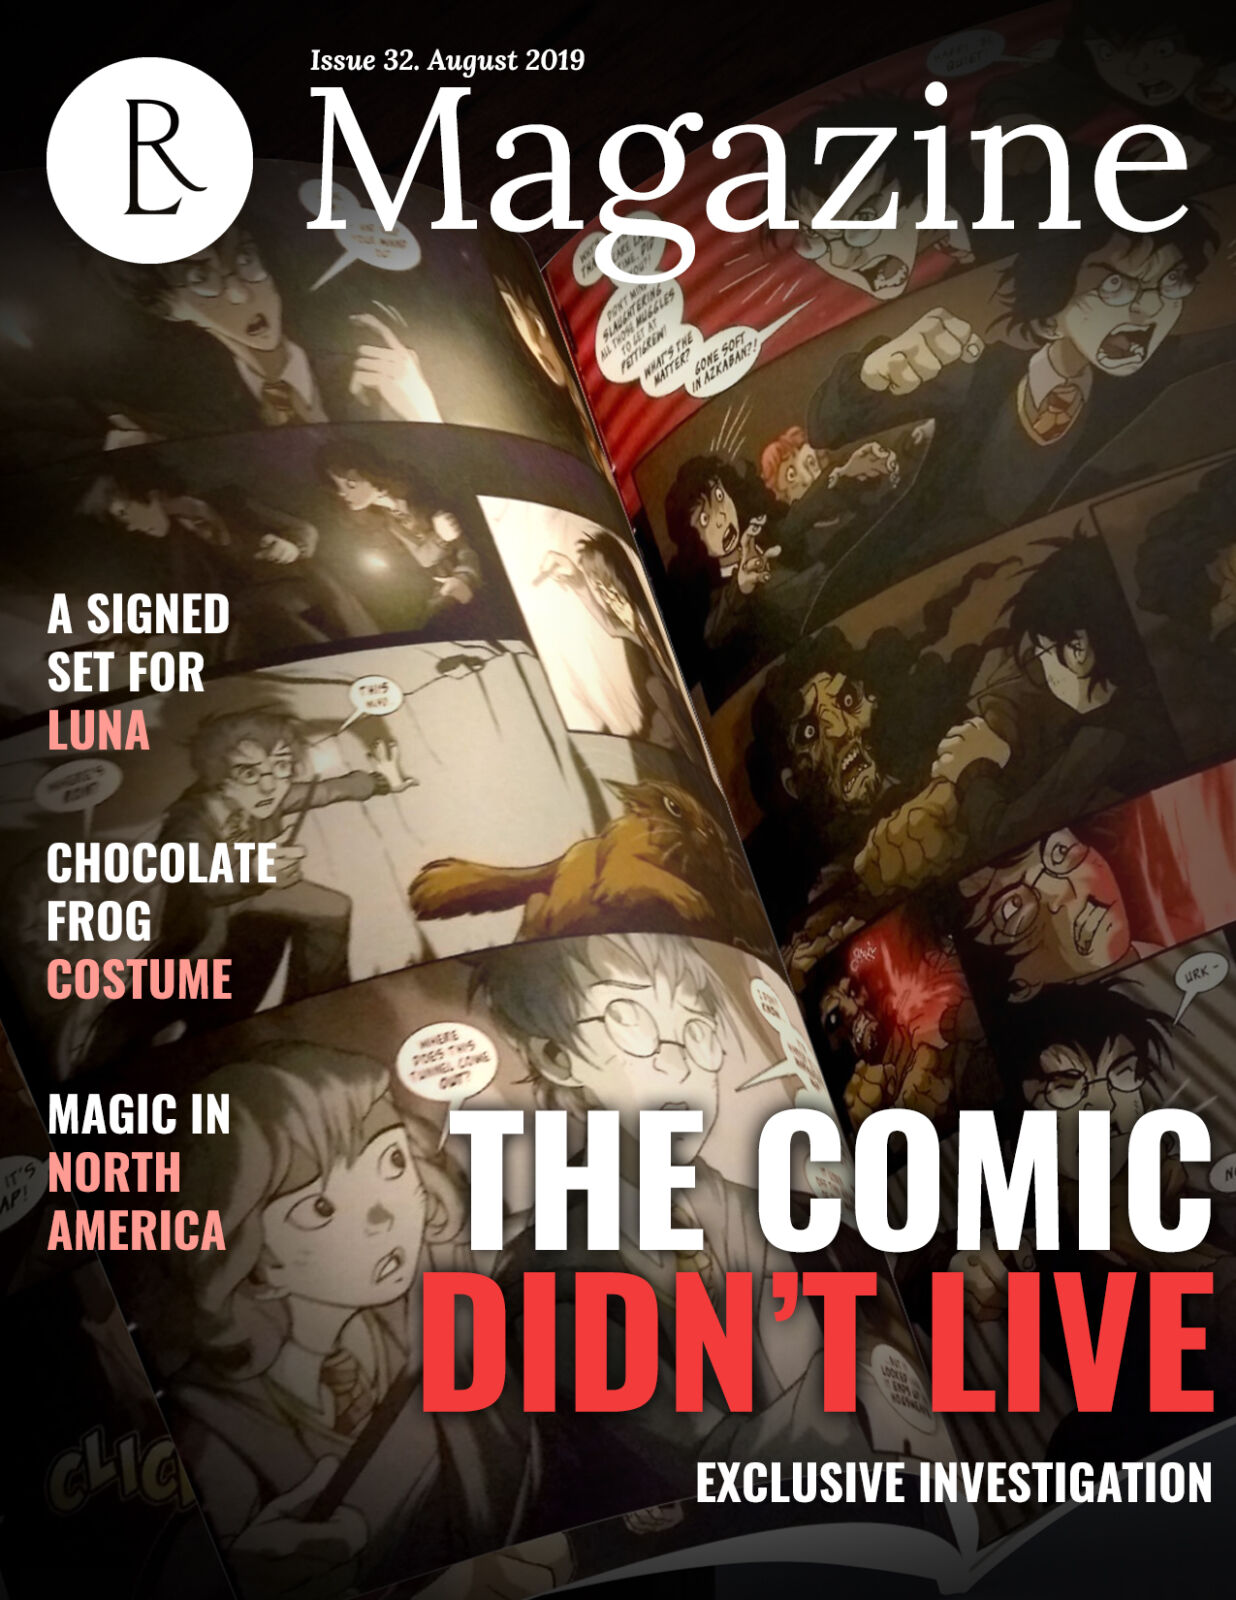 The Rowling Library Magazine #32 (August 2019): The Comic Didn't Live